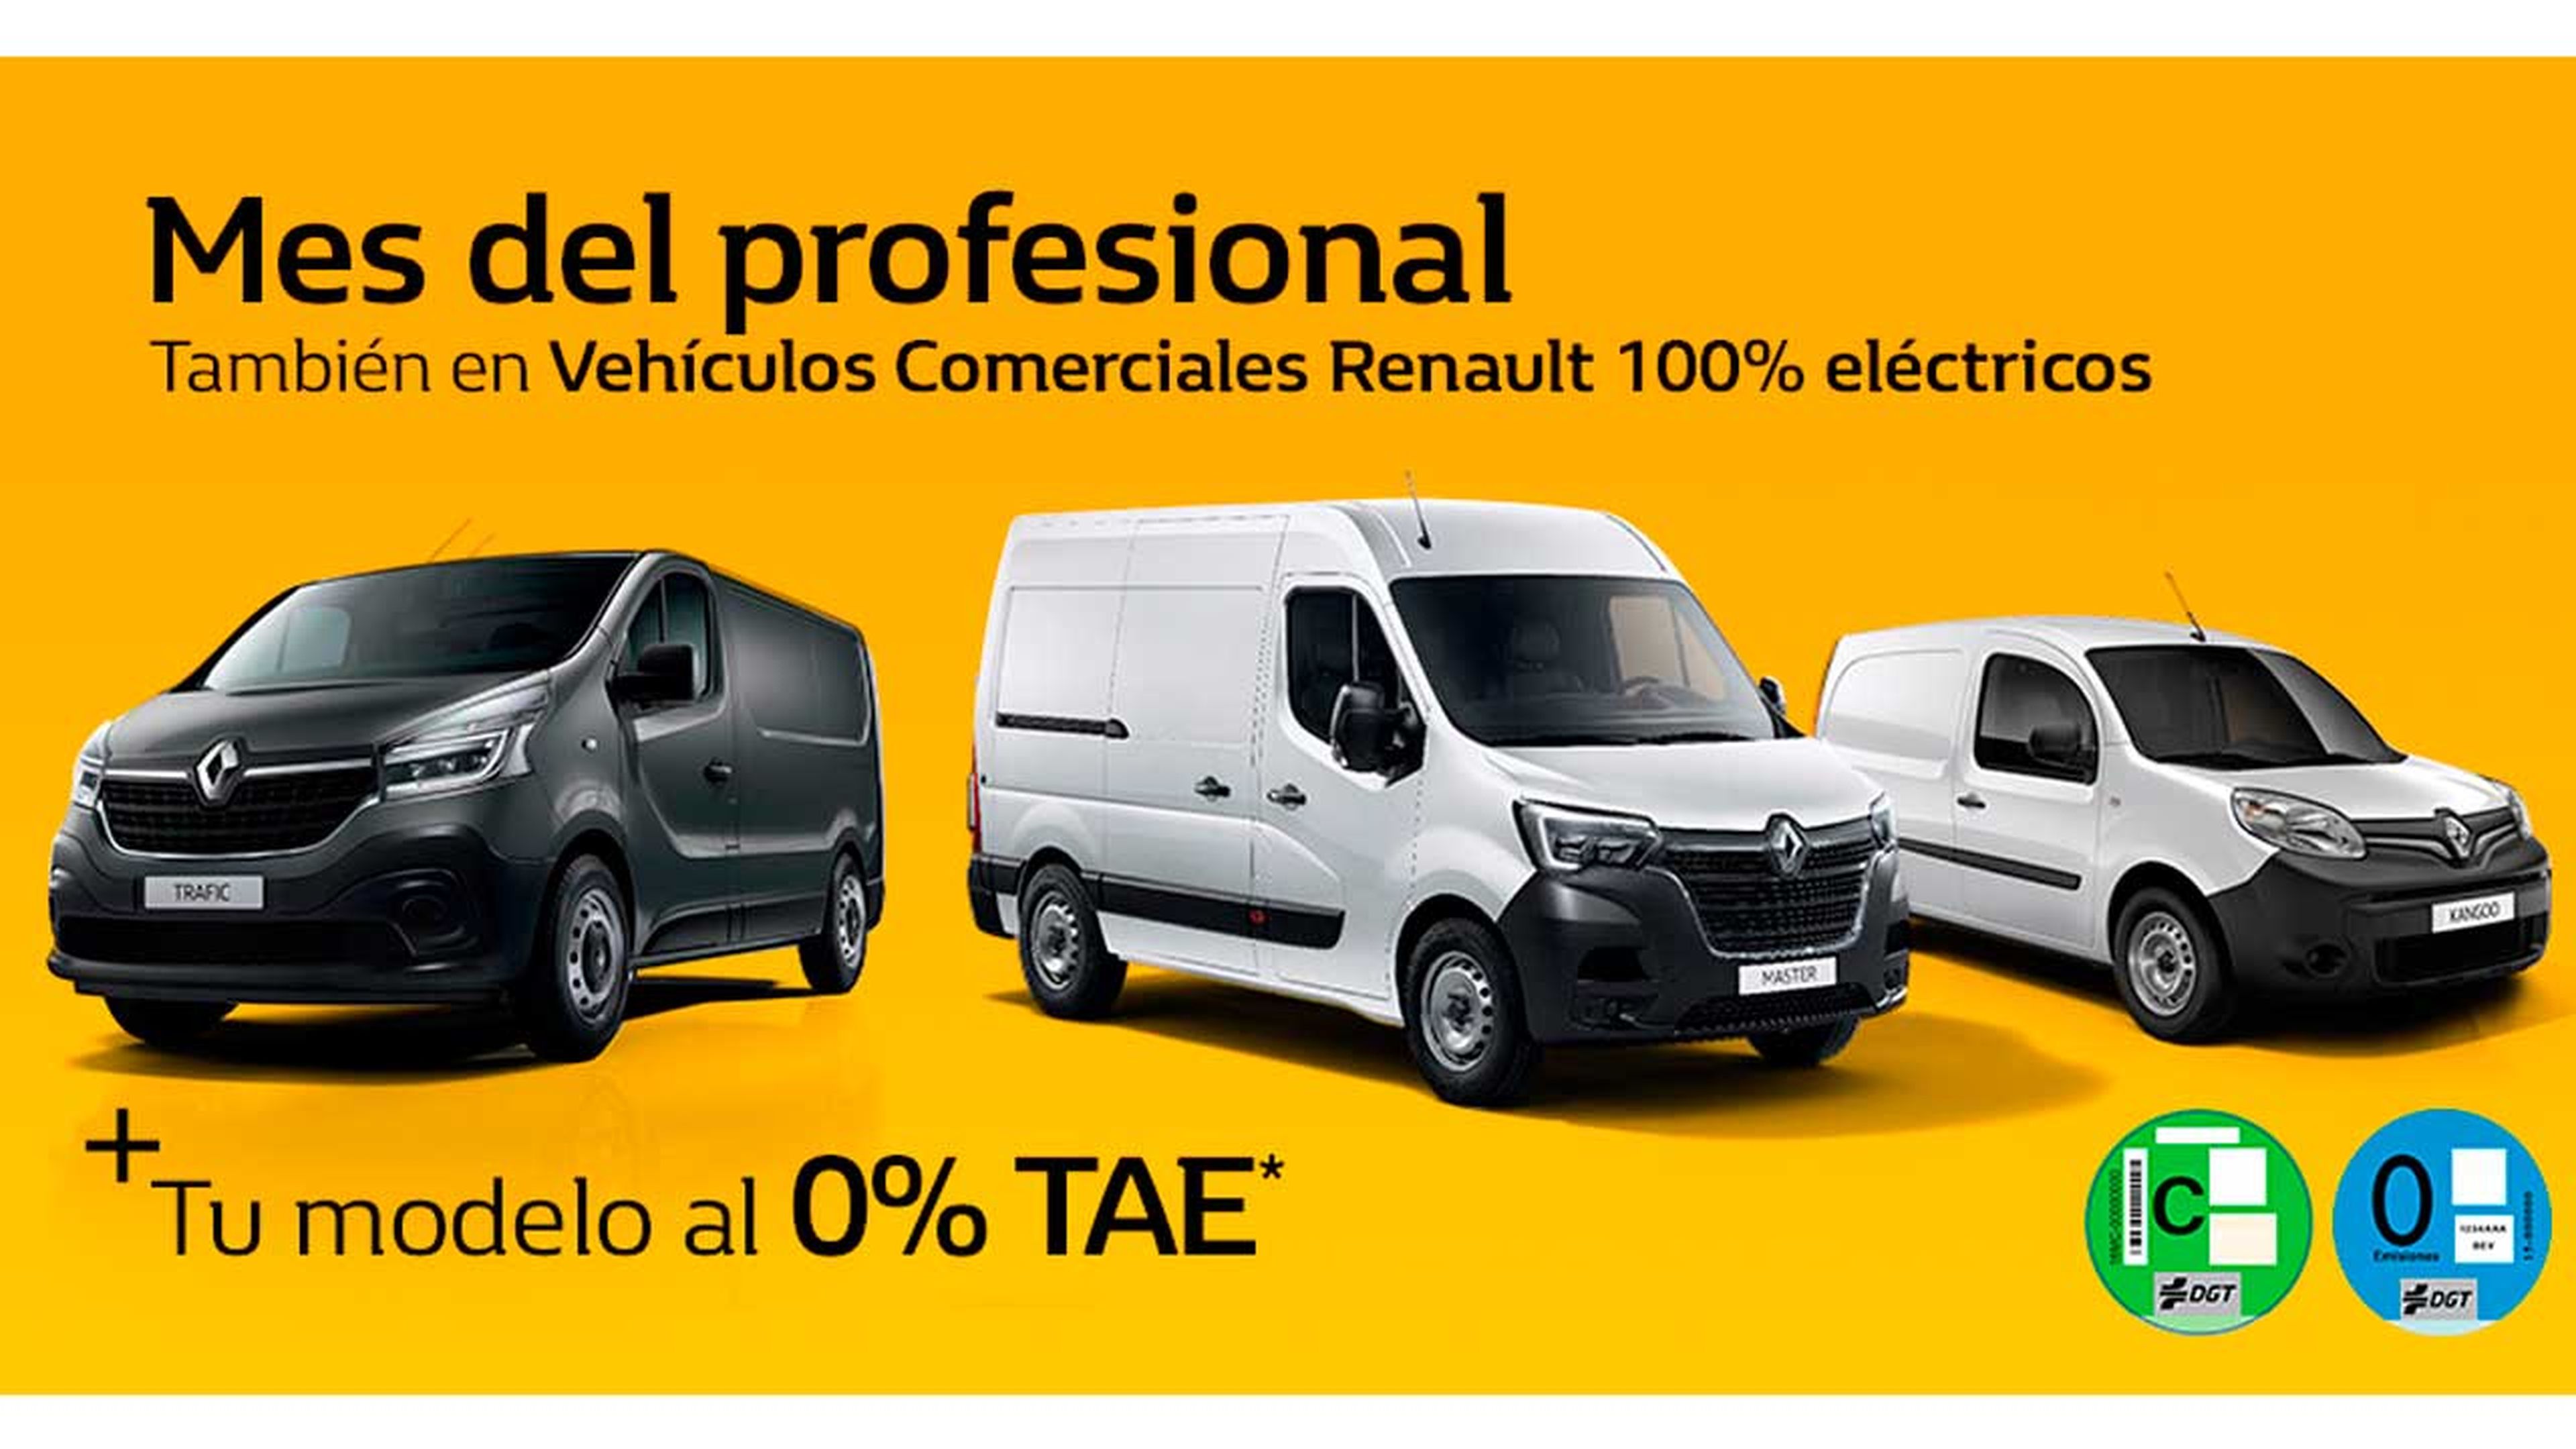 renault-now-o-citroen-select_renault-now_mes-del-profesional